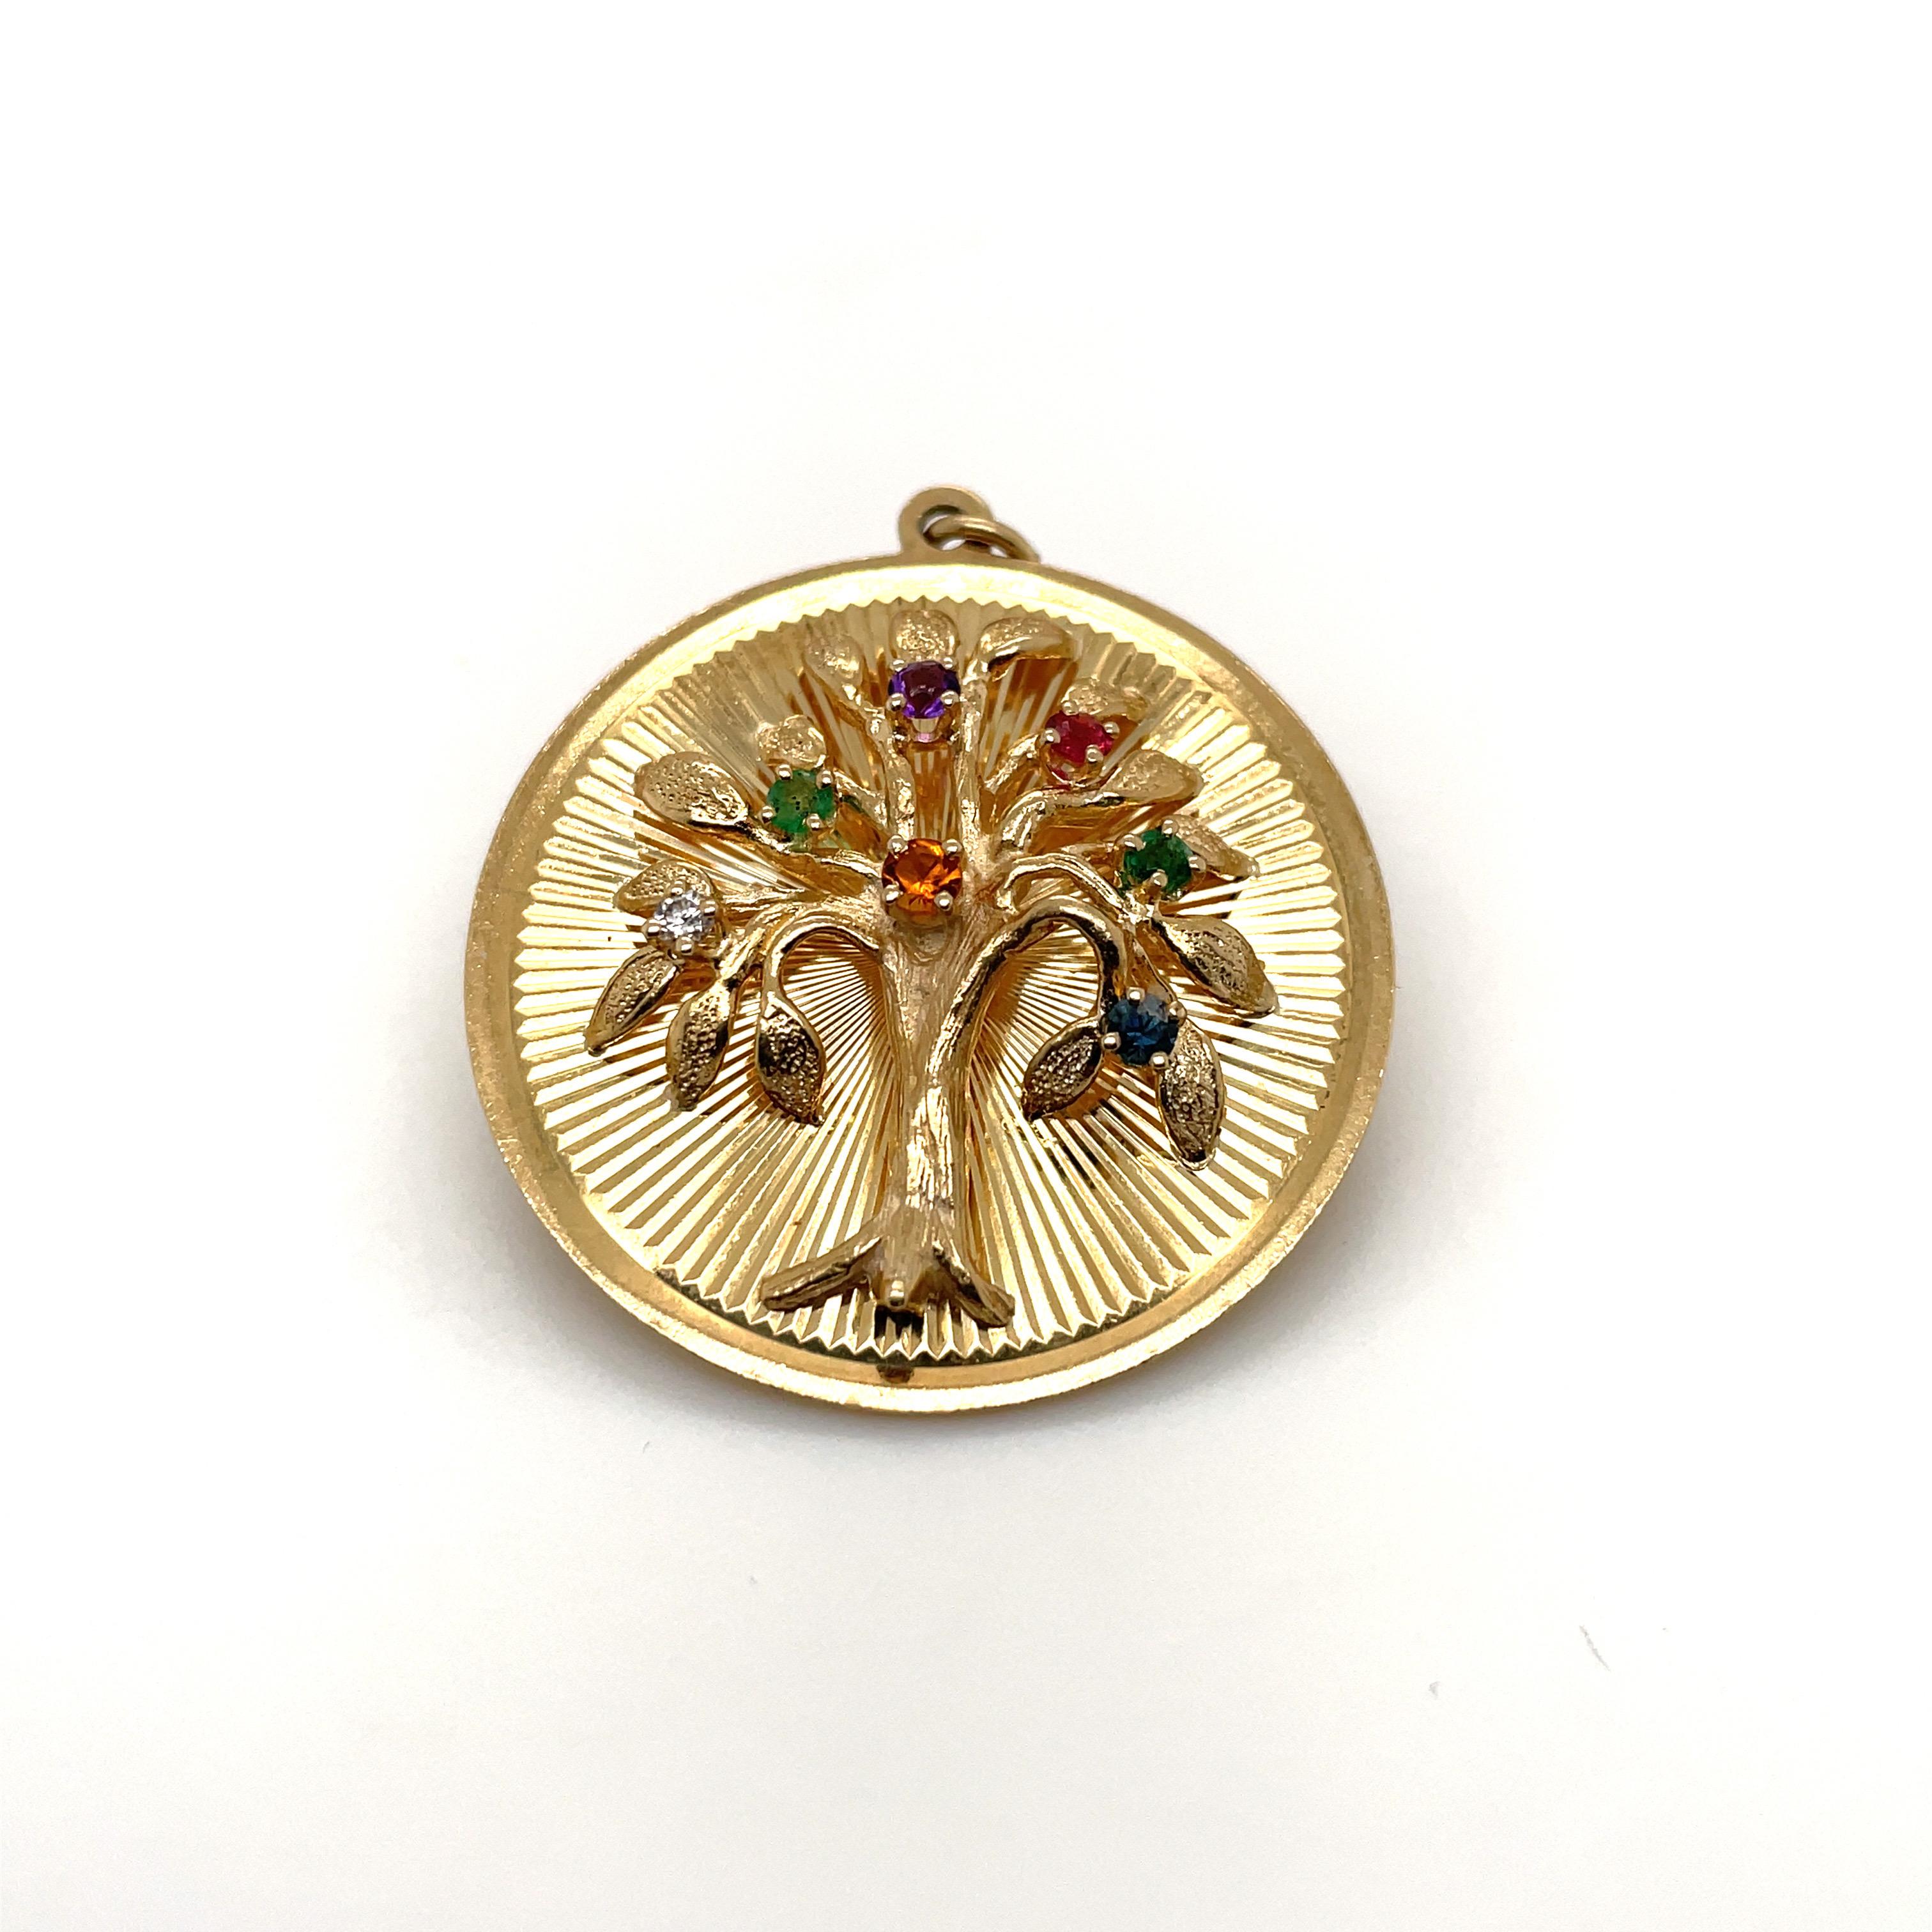 Large and impressive Tree of Life charm/pendant. Made and signed by HENRY DANKNER & SONS.  A three-dimensional 